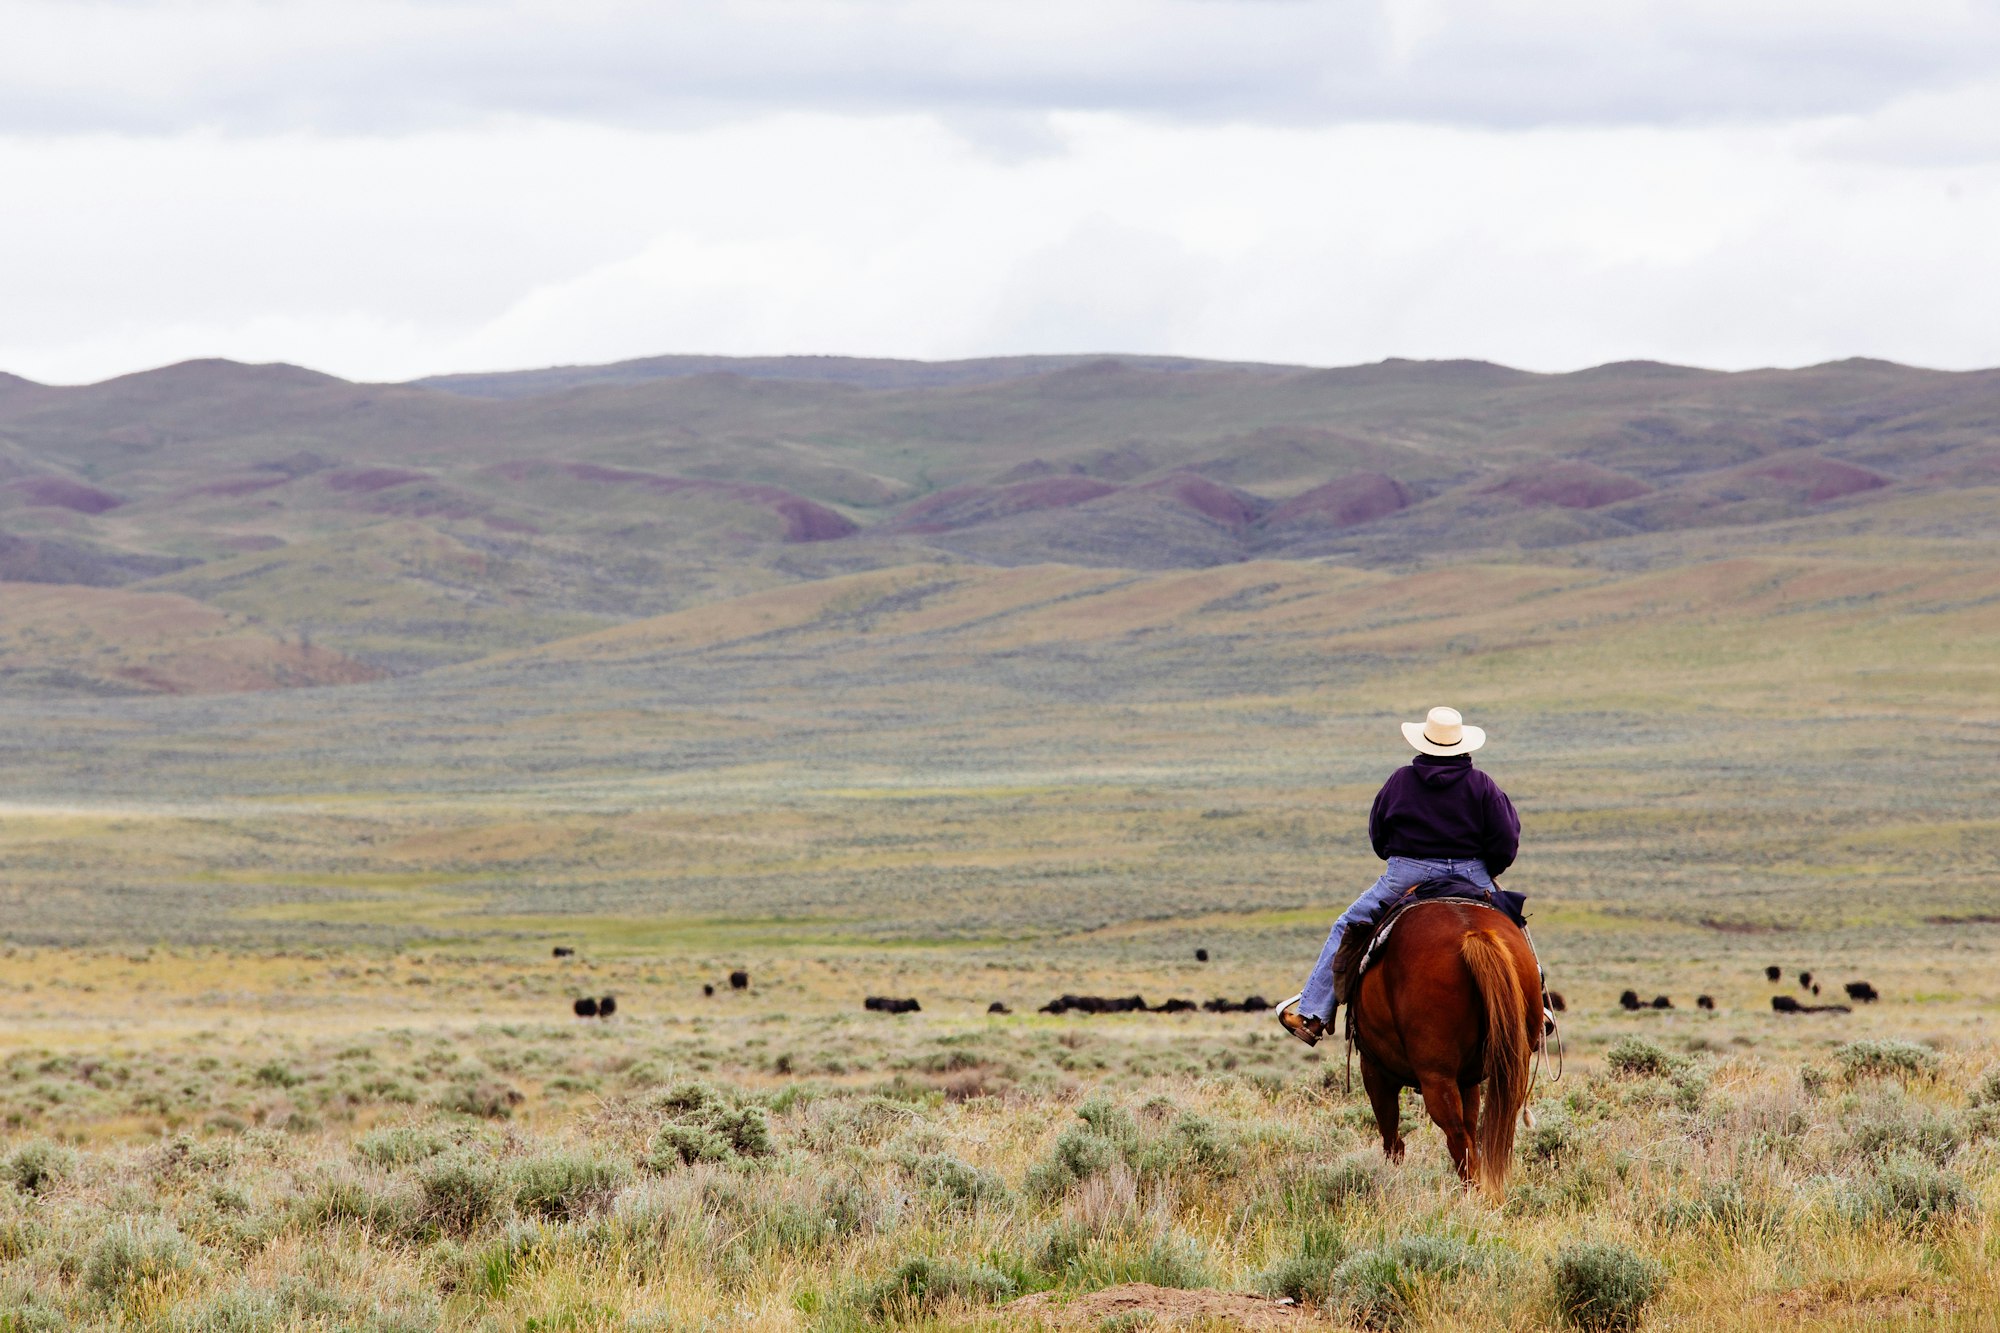 A rancher rides out to collect some cows in rural Montana.